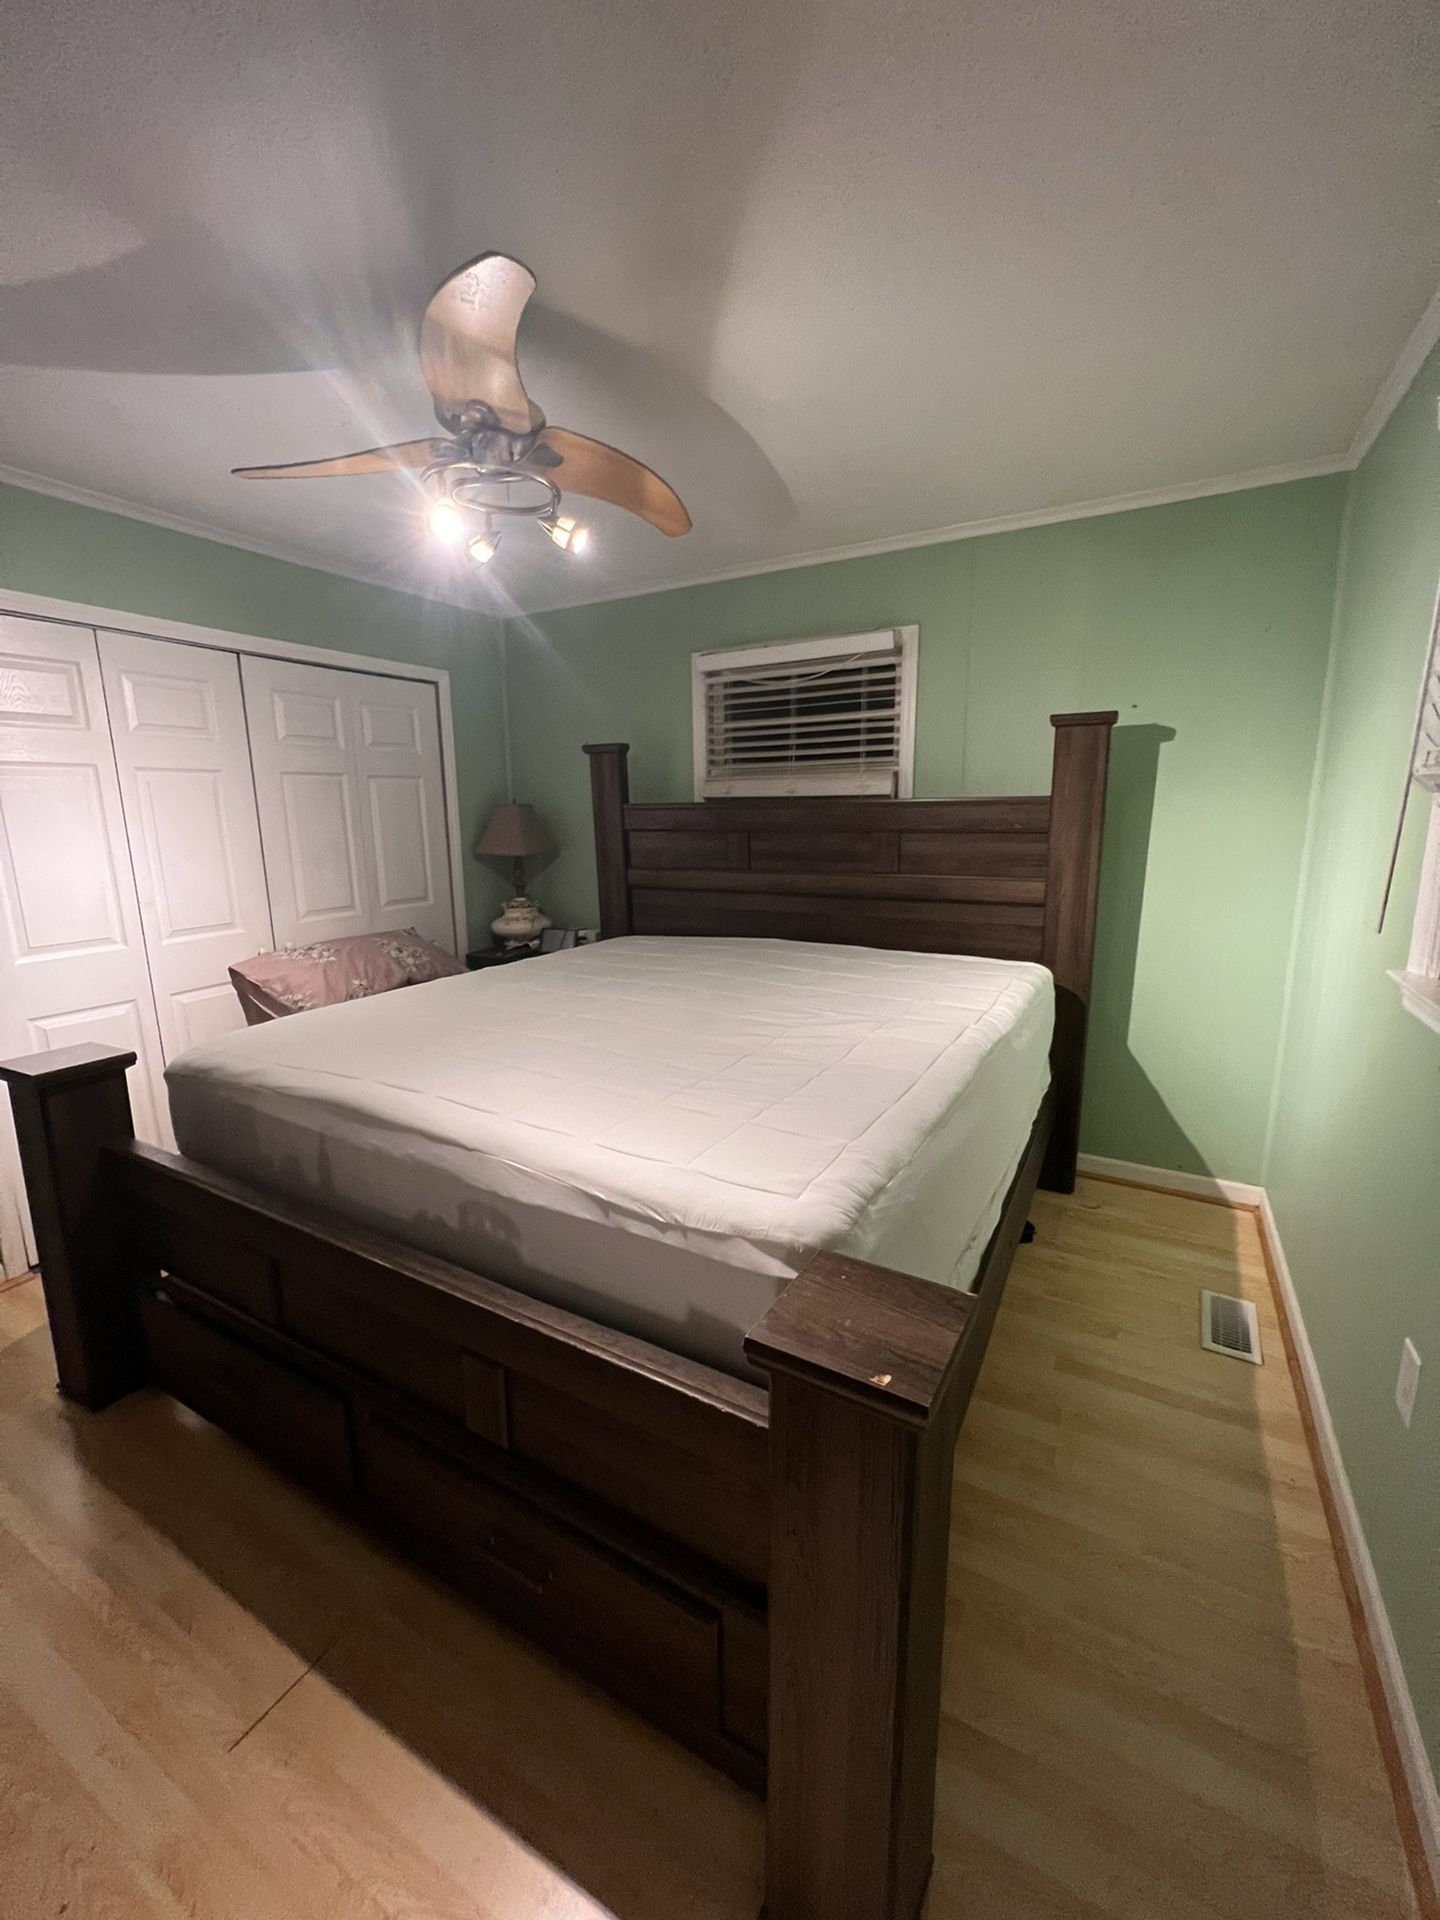 King size Bedroom Set: Mattress/boxsprng NOT INCLUDE